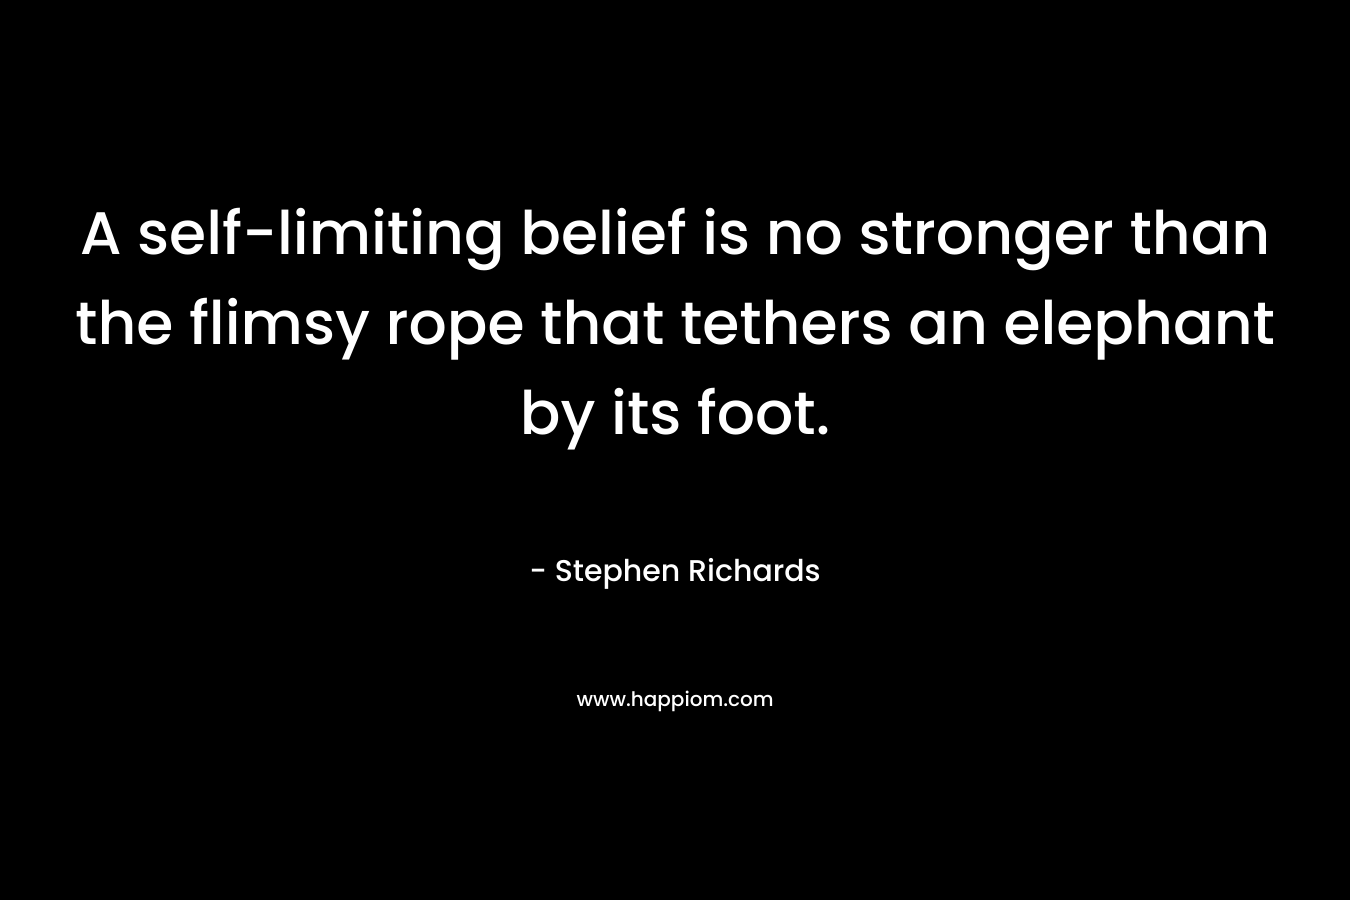 A self-limiting belief is no stronger than the flimsy rope that tethers an elephant by its foot.